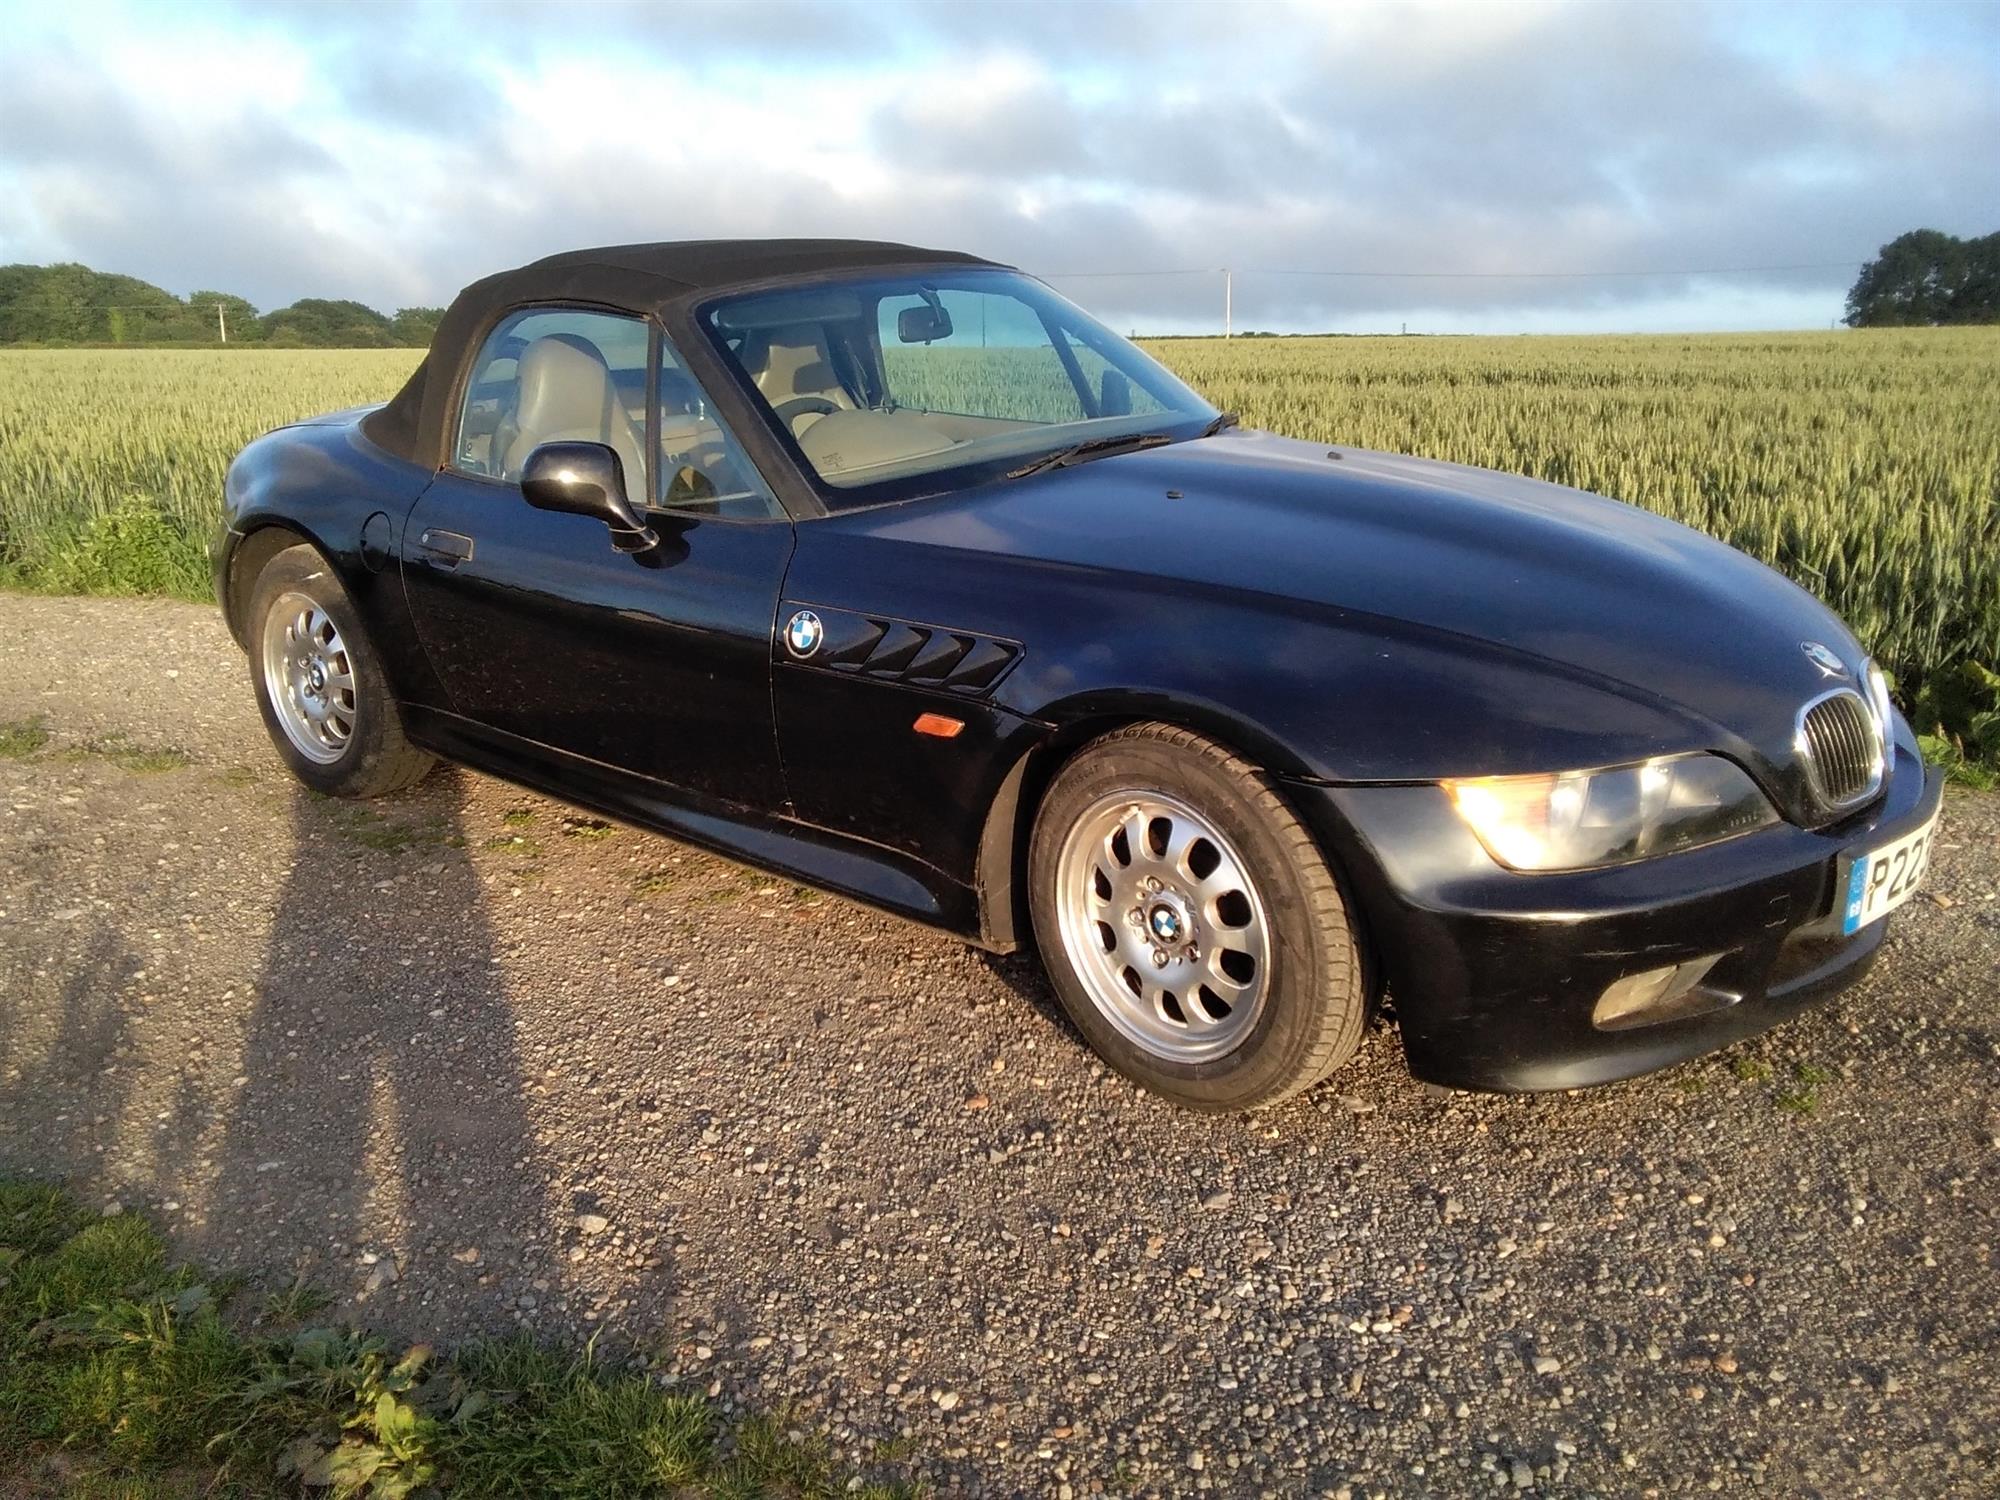 Z3 BMW Roadster. 1997. Registration number P223 GVN. Pre-facelift 'narrow-body' version with